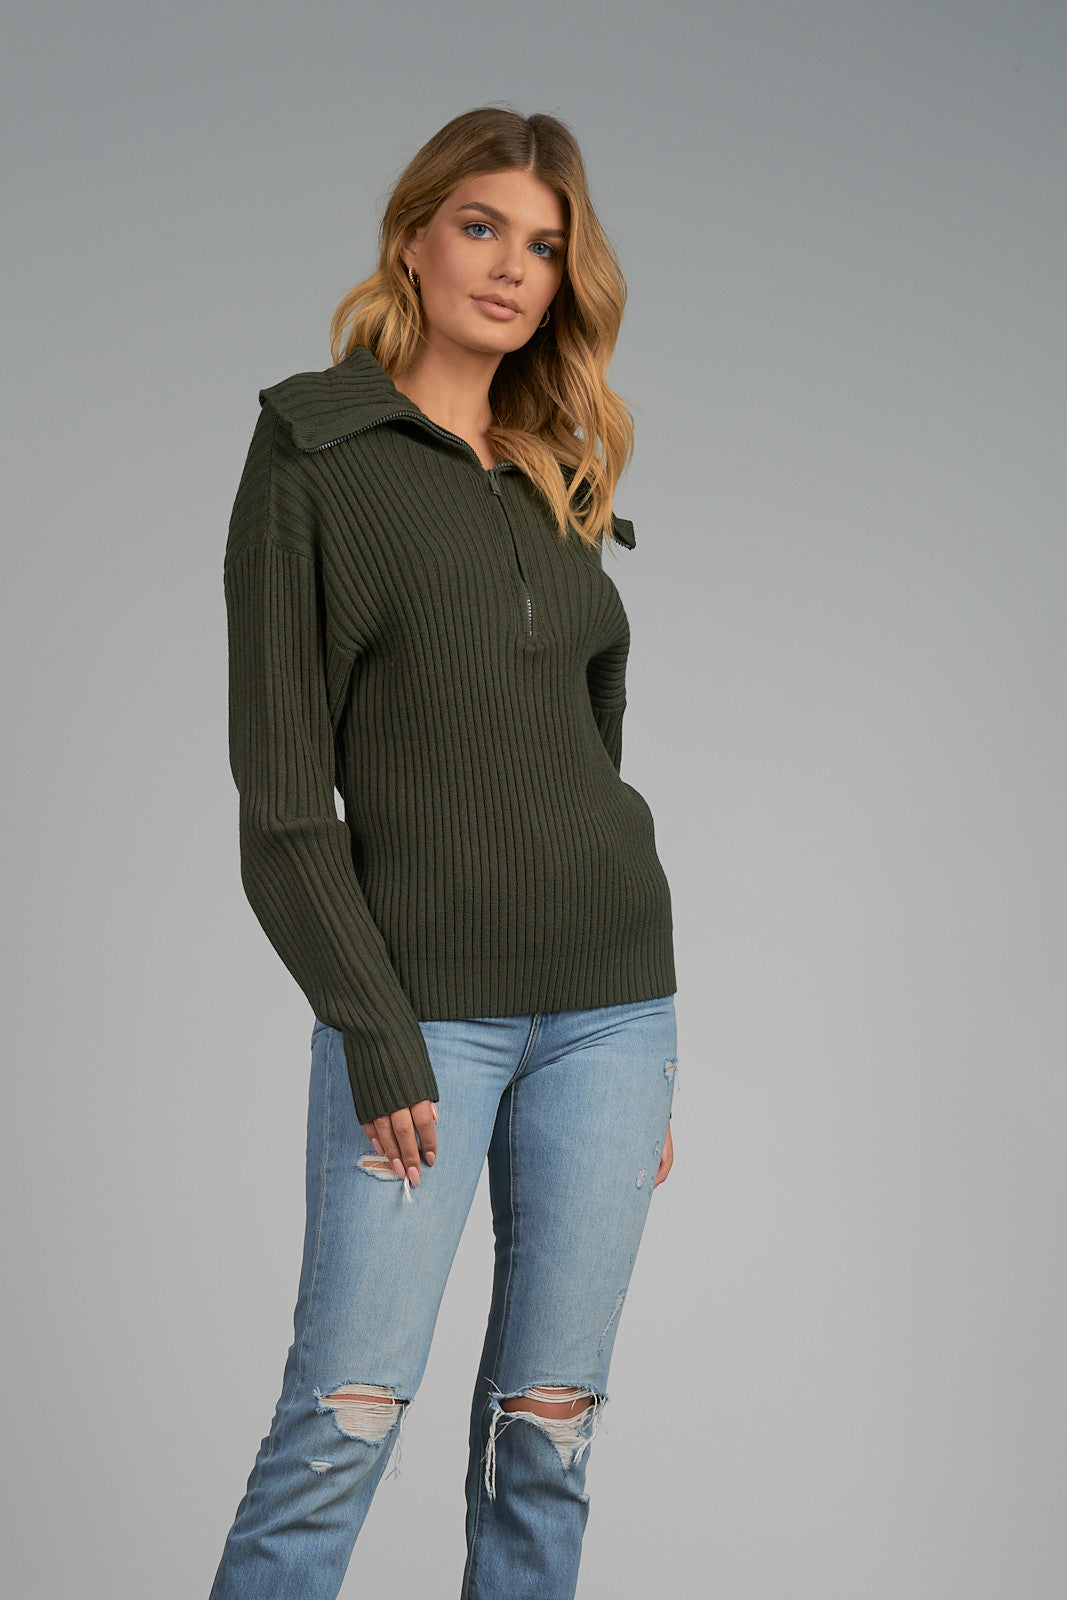 Elan Olive Green Ribbed Zipper Front Sweater